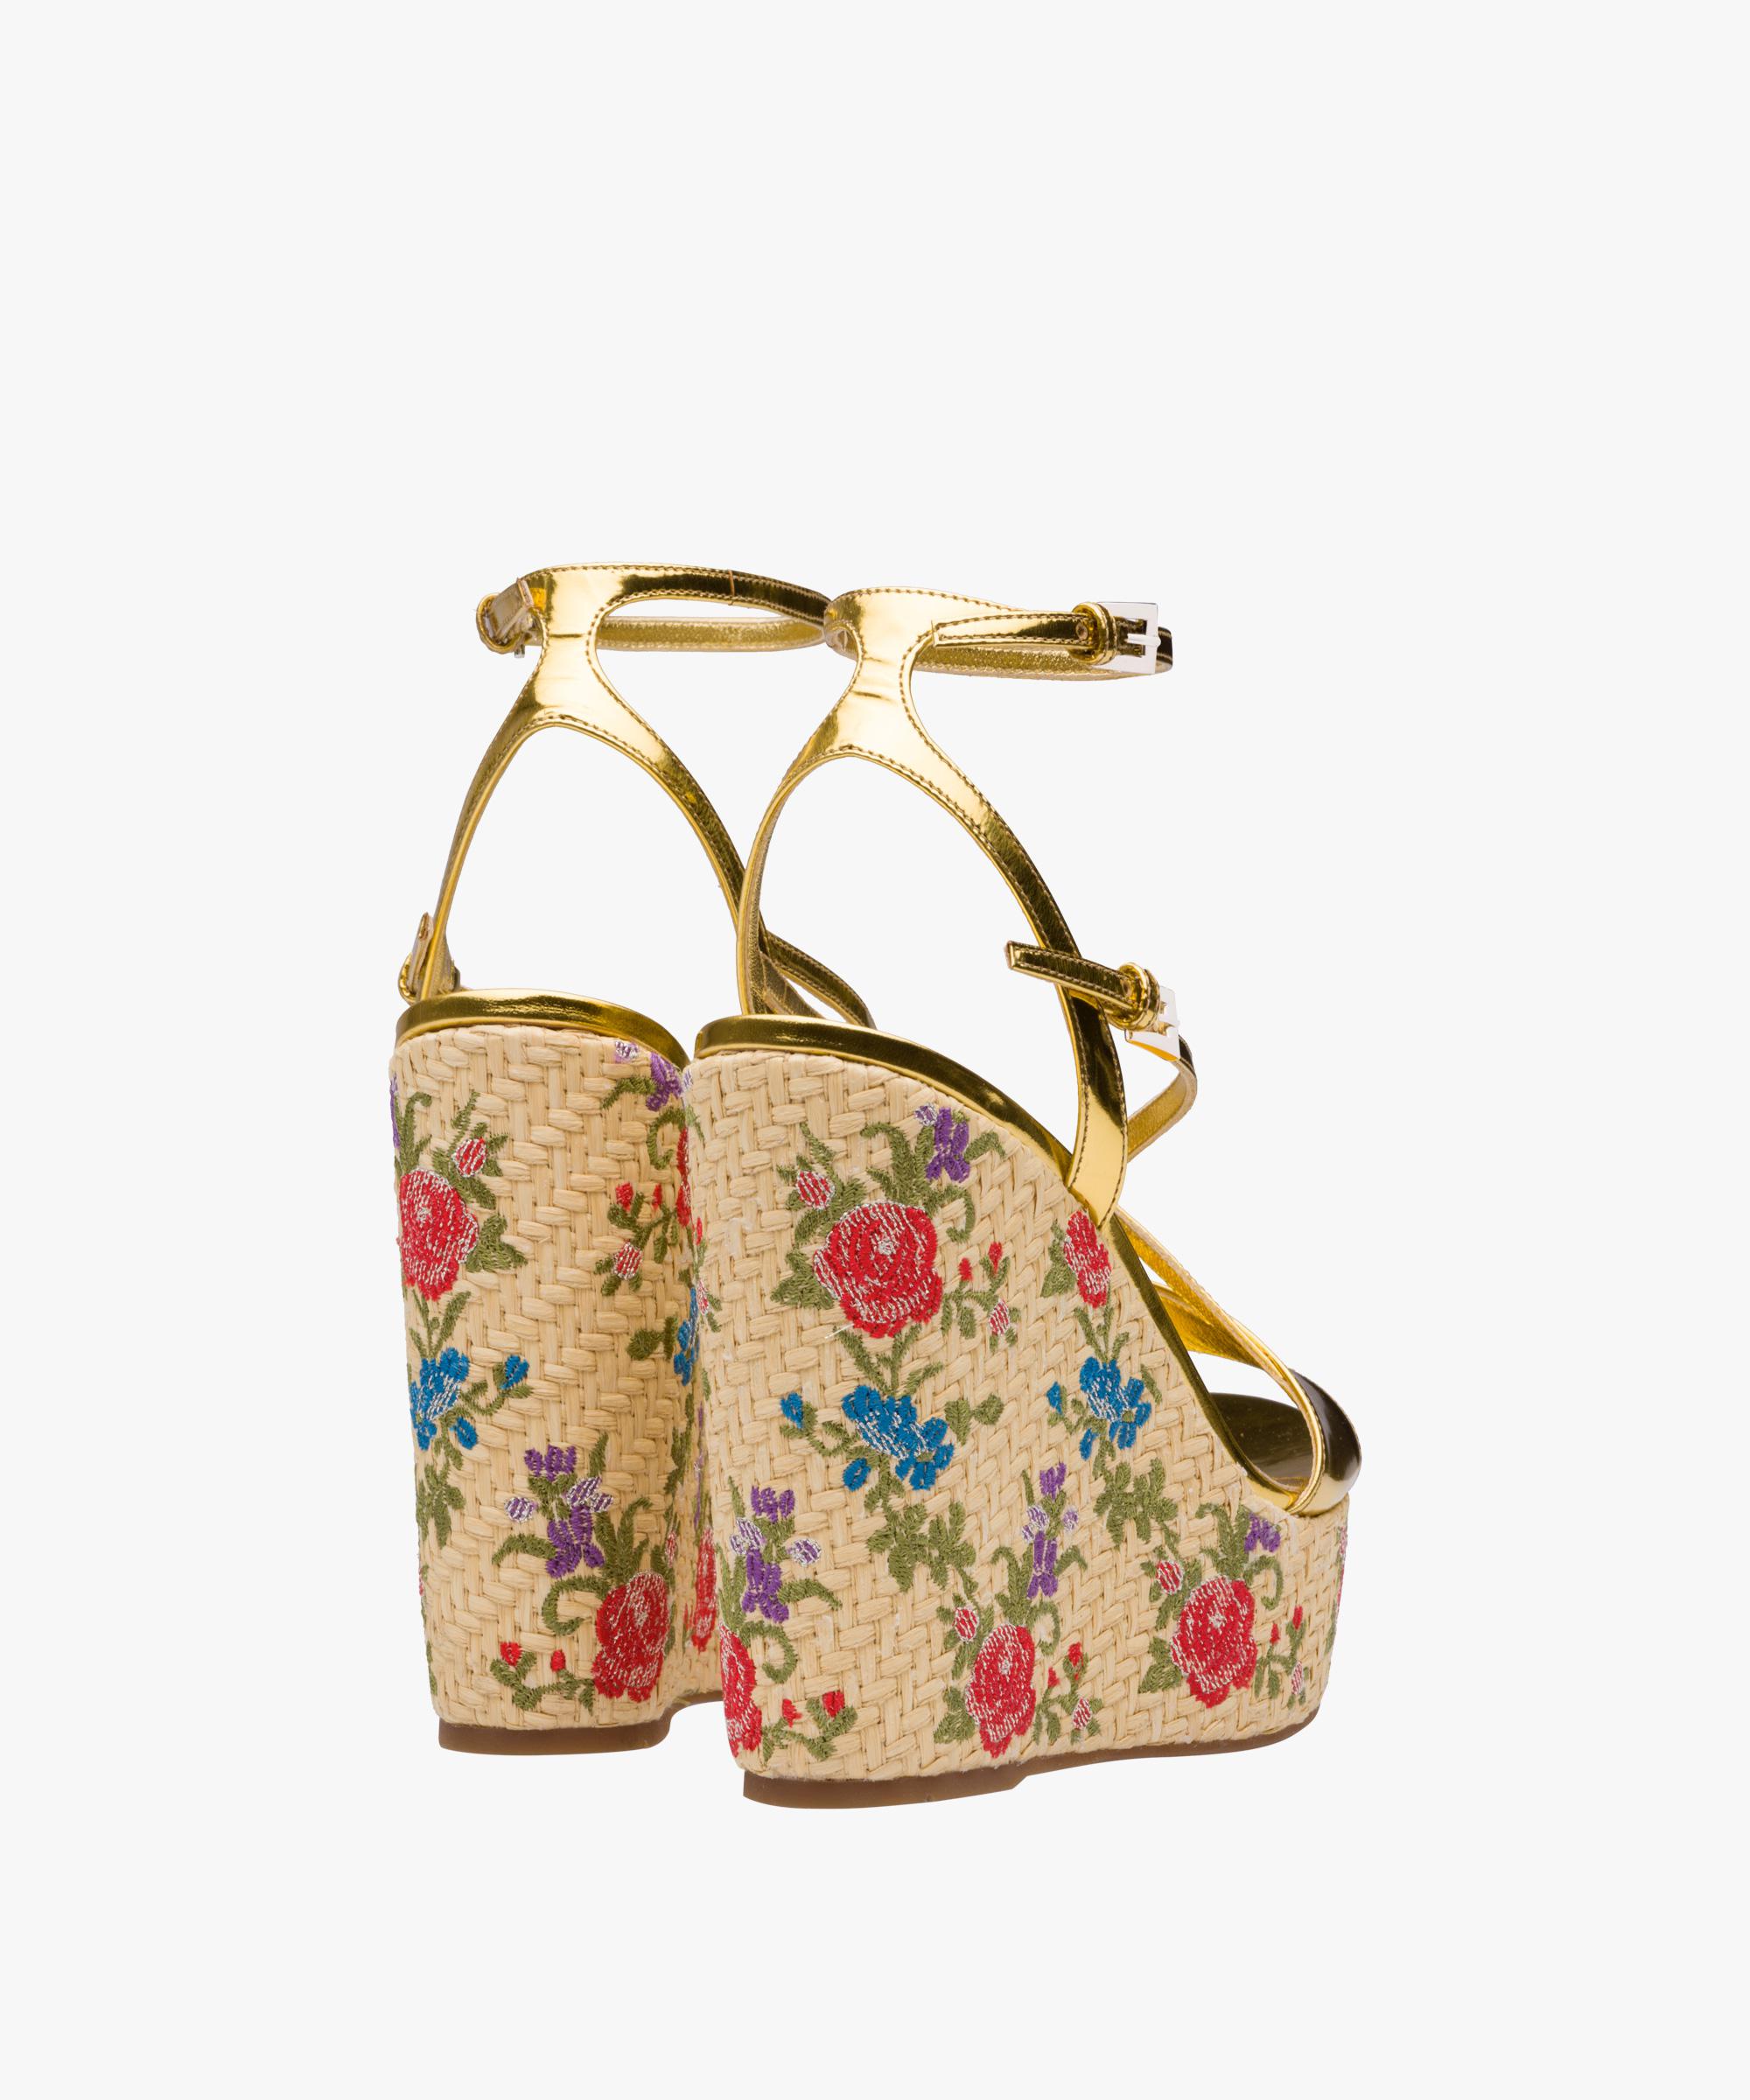 Prada Leather Sandals With Floral Wedge Heel in Gold (Metallic) - Lyst